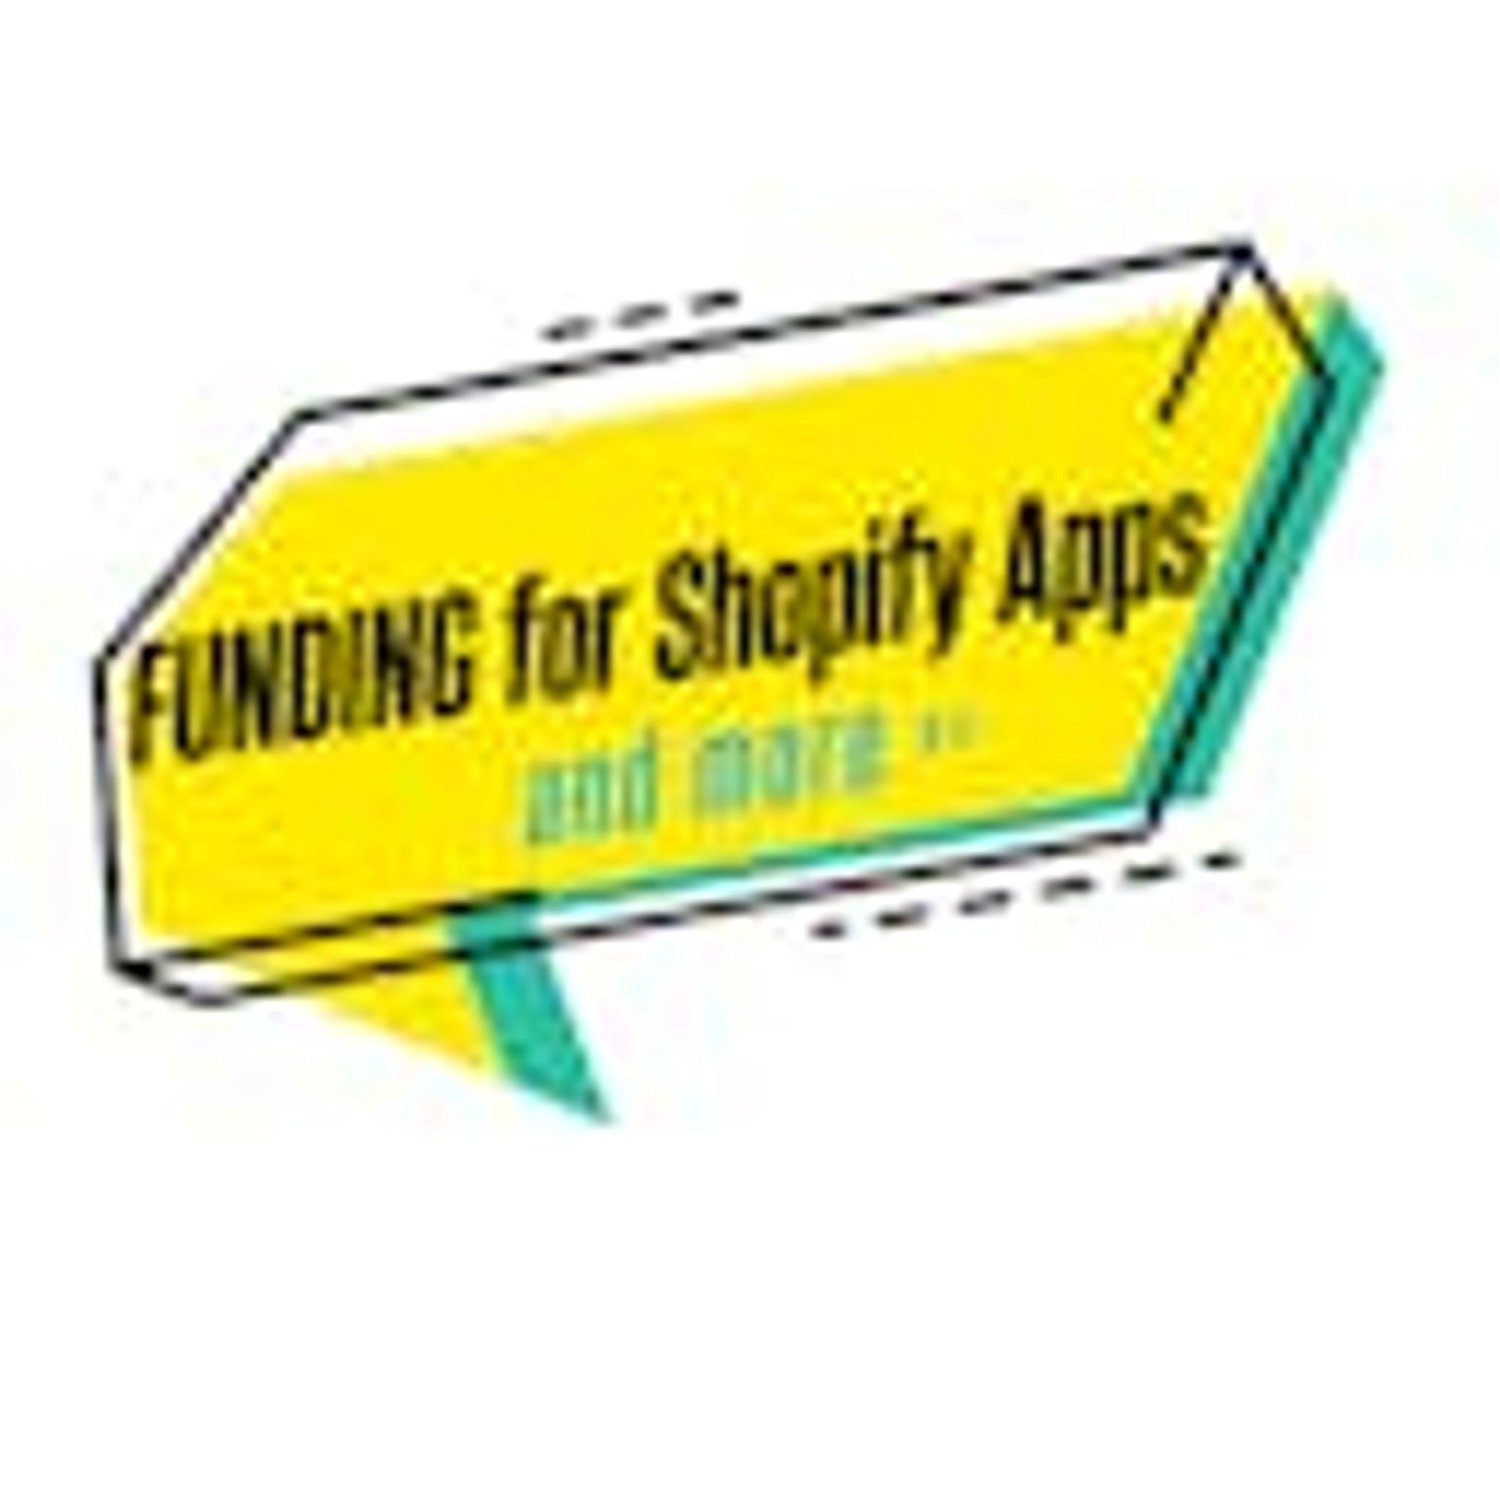 Funding for Shopify Partners and more